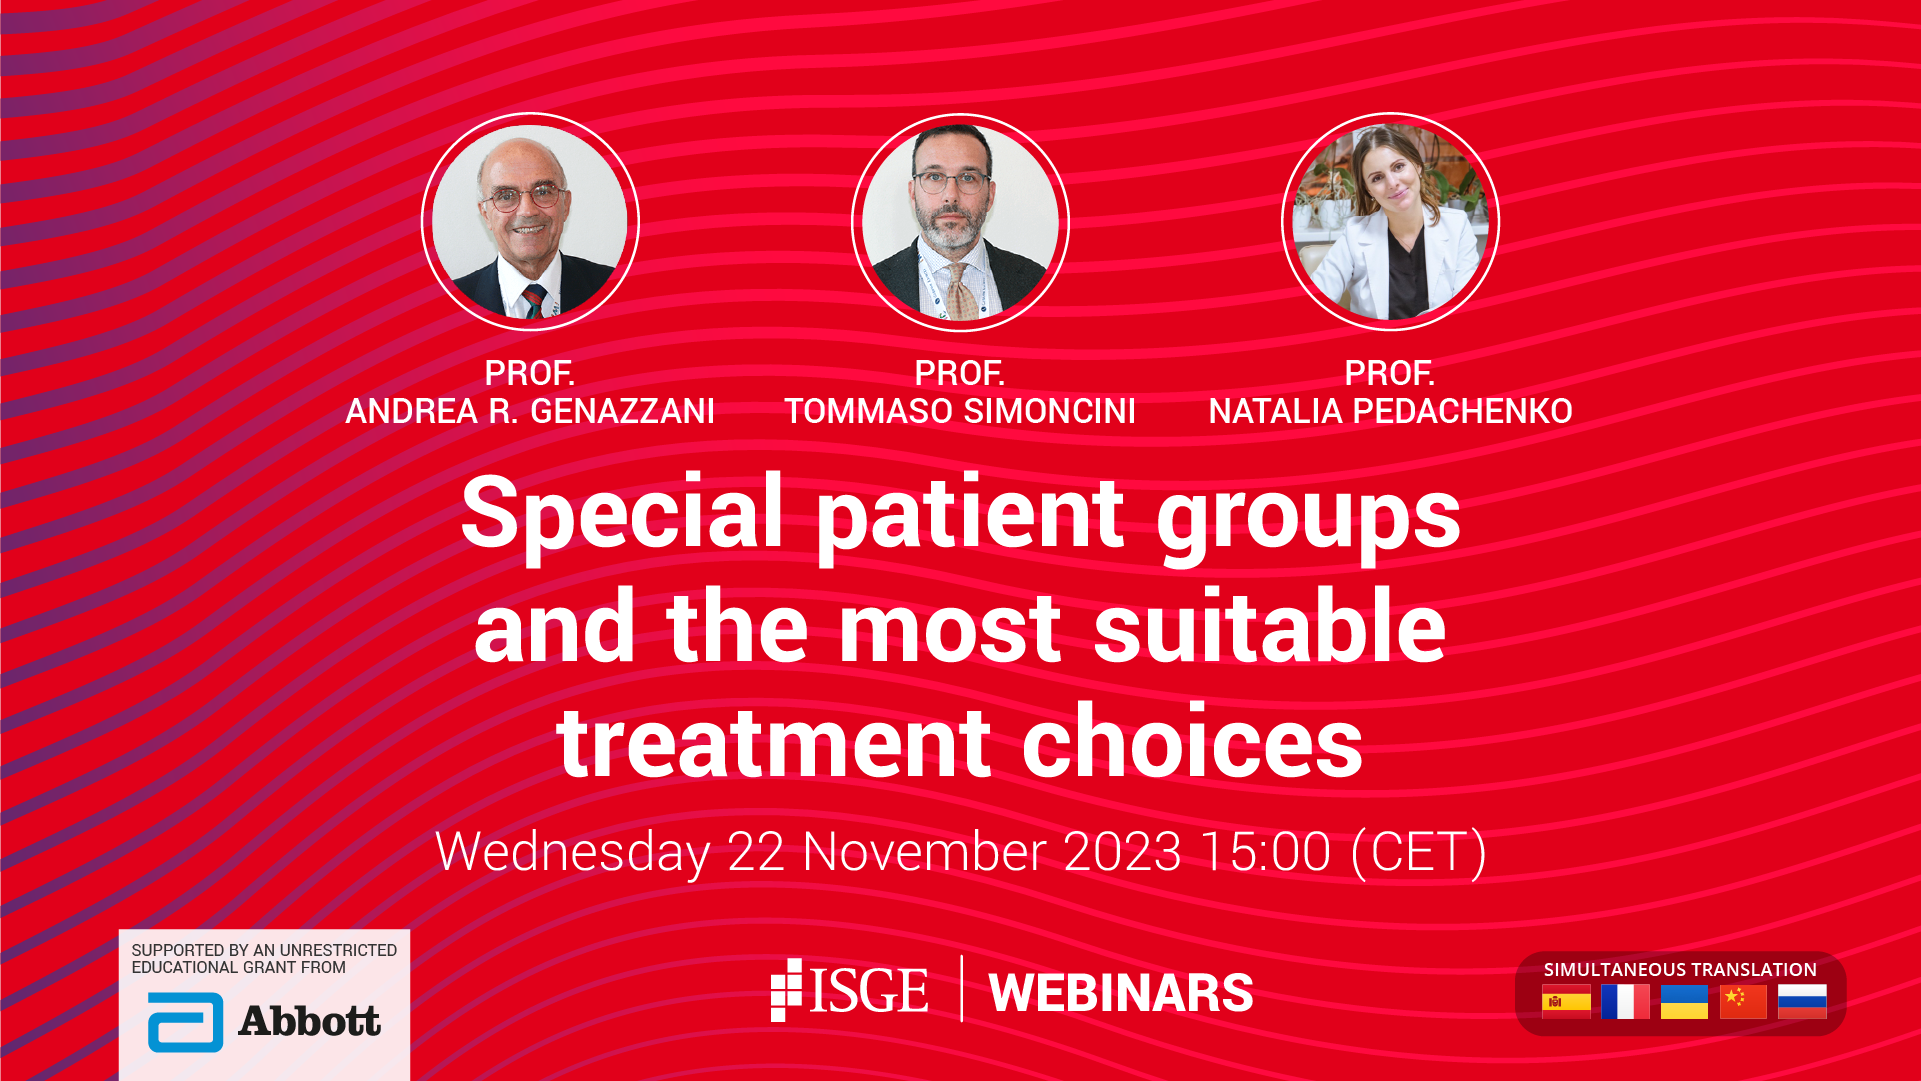 Special patient groups and the most suitable treatment choices